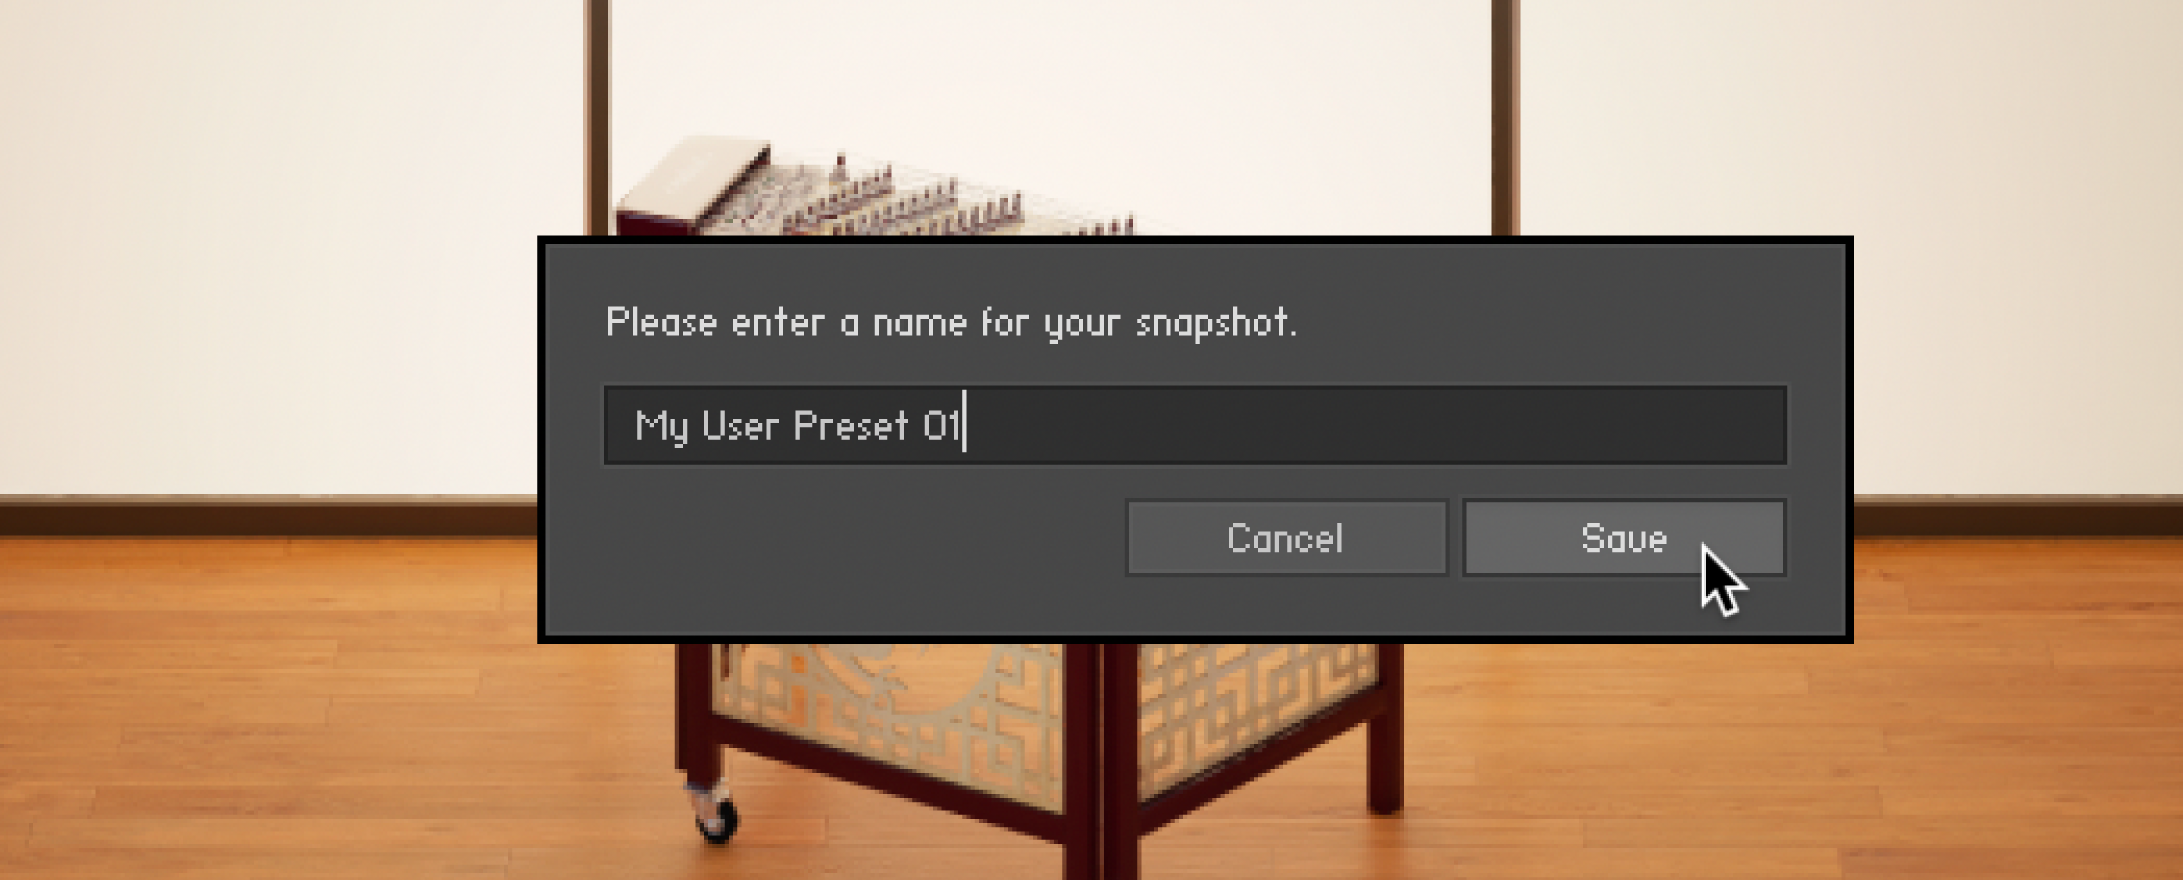 A dialog window to enter the name of a saved user snapshot.